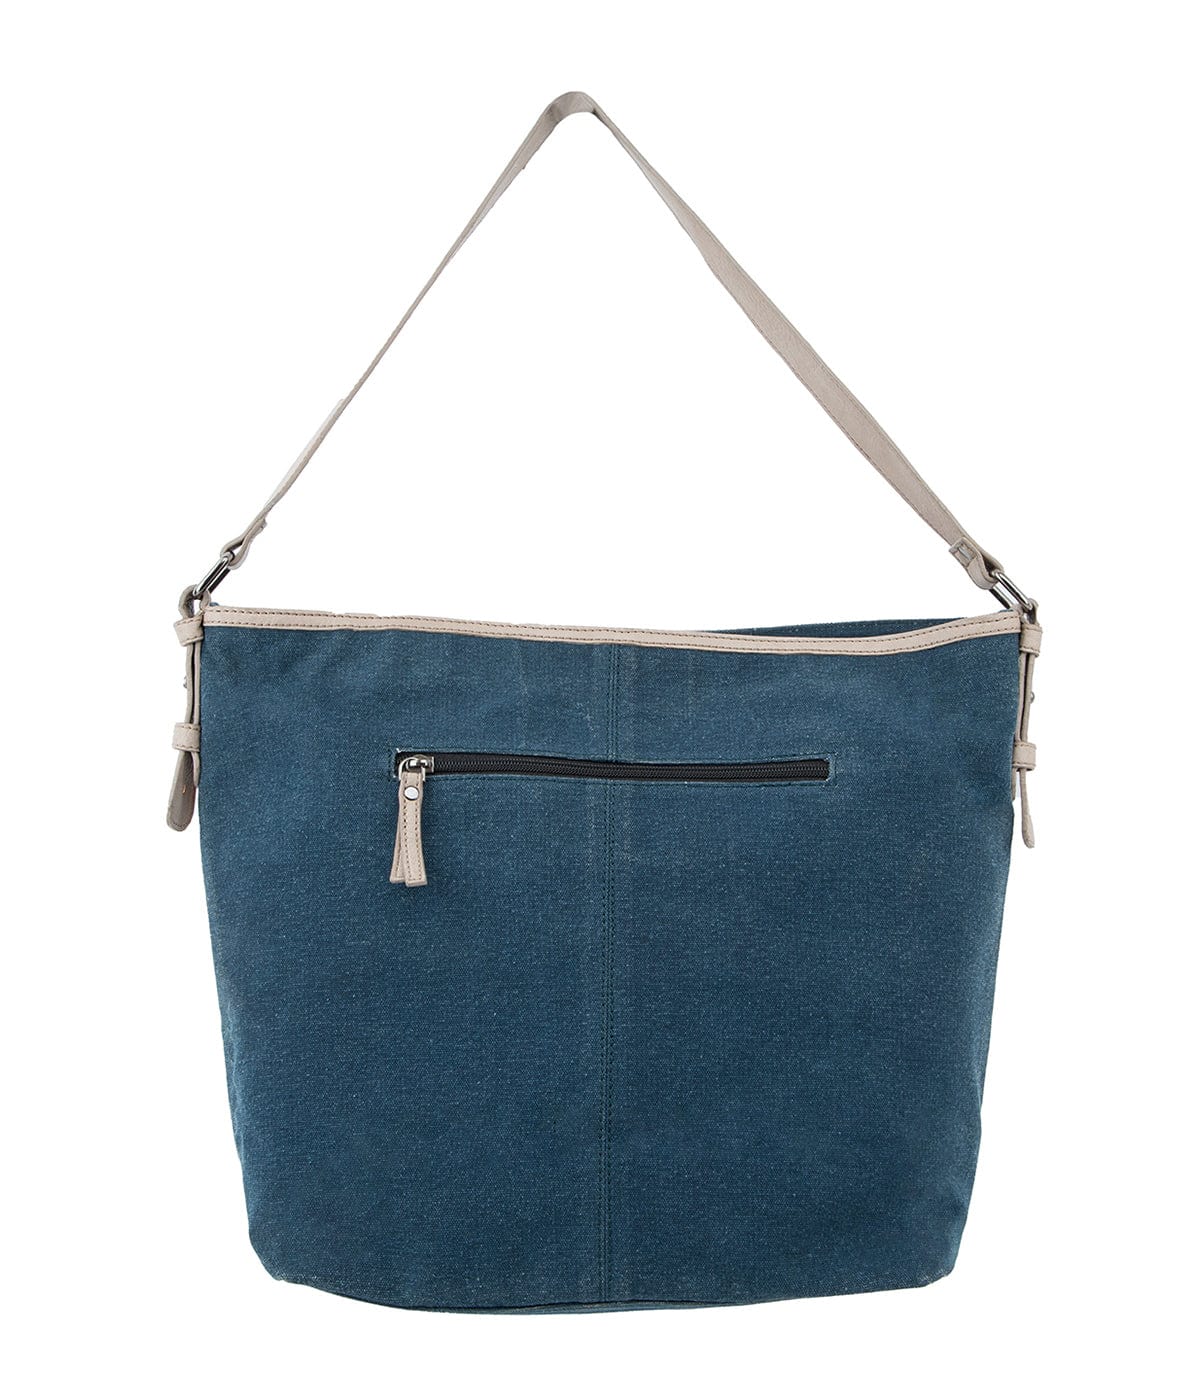 Mona B Upcycled Canvas Large Canvas Handbag for Women | Tote Bag | Crossbody Bag for Grocery, Shopping, Travel | Stylish Vintage Shoulder Bags for Women: Slouch - Handbag by Mona-B - Backpack, EOSS, Flash Sale, Flat60, Sale, Shop1999, Shop2999, Shop3999